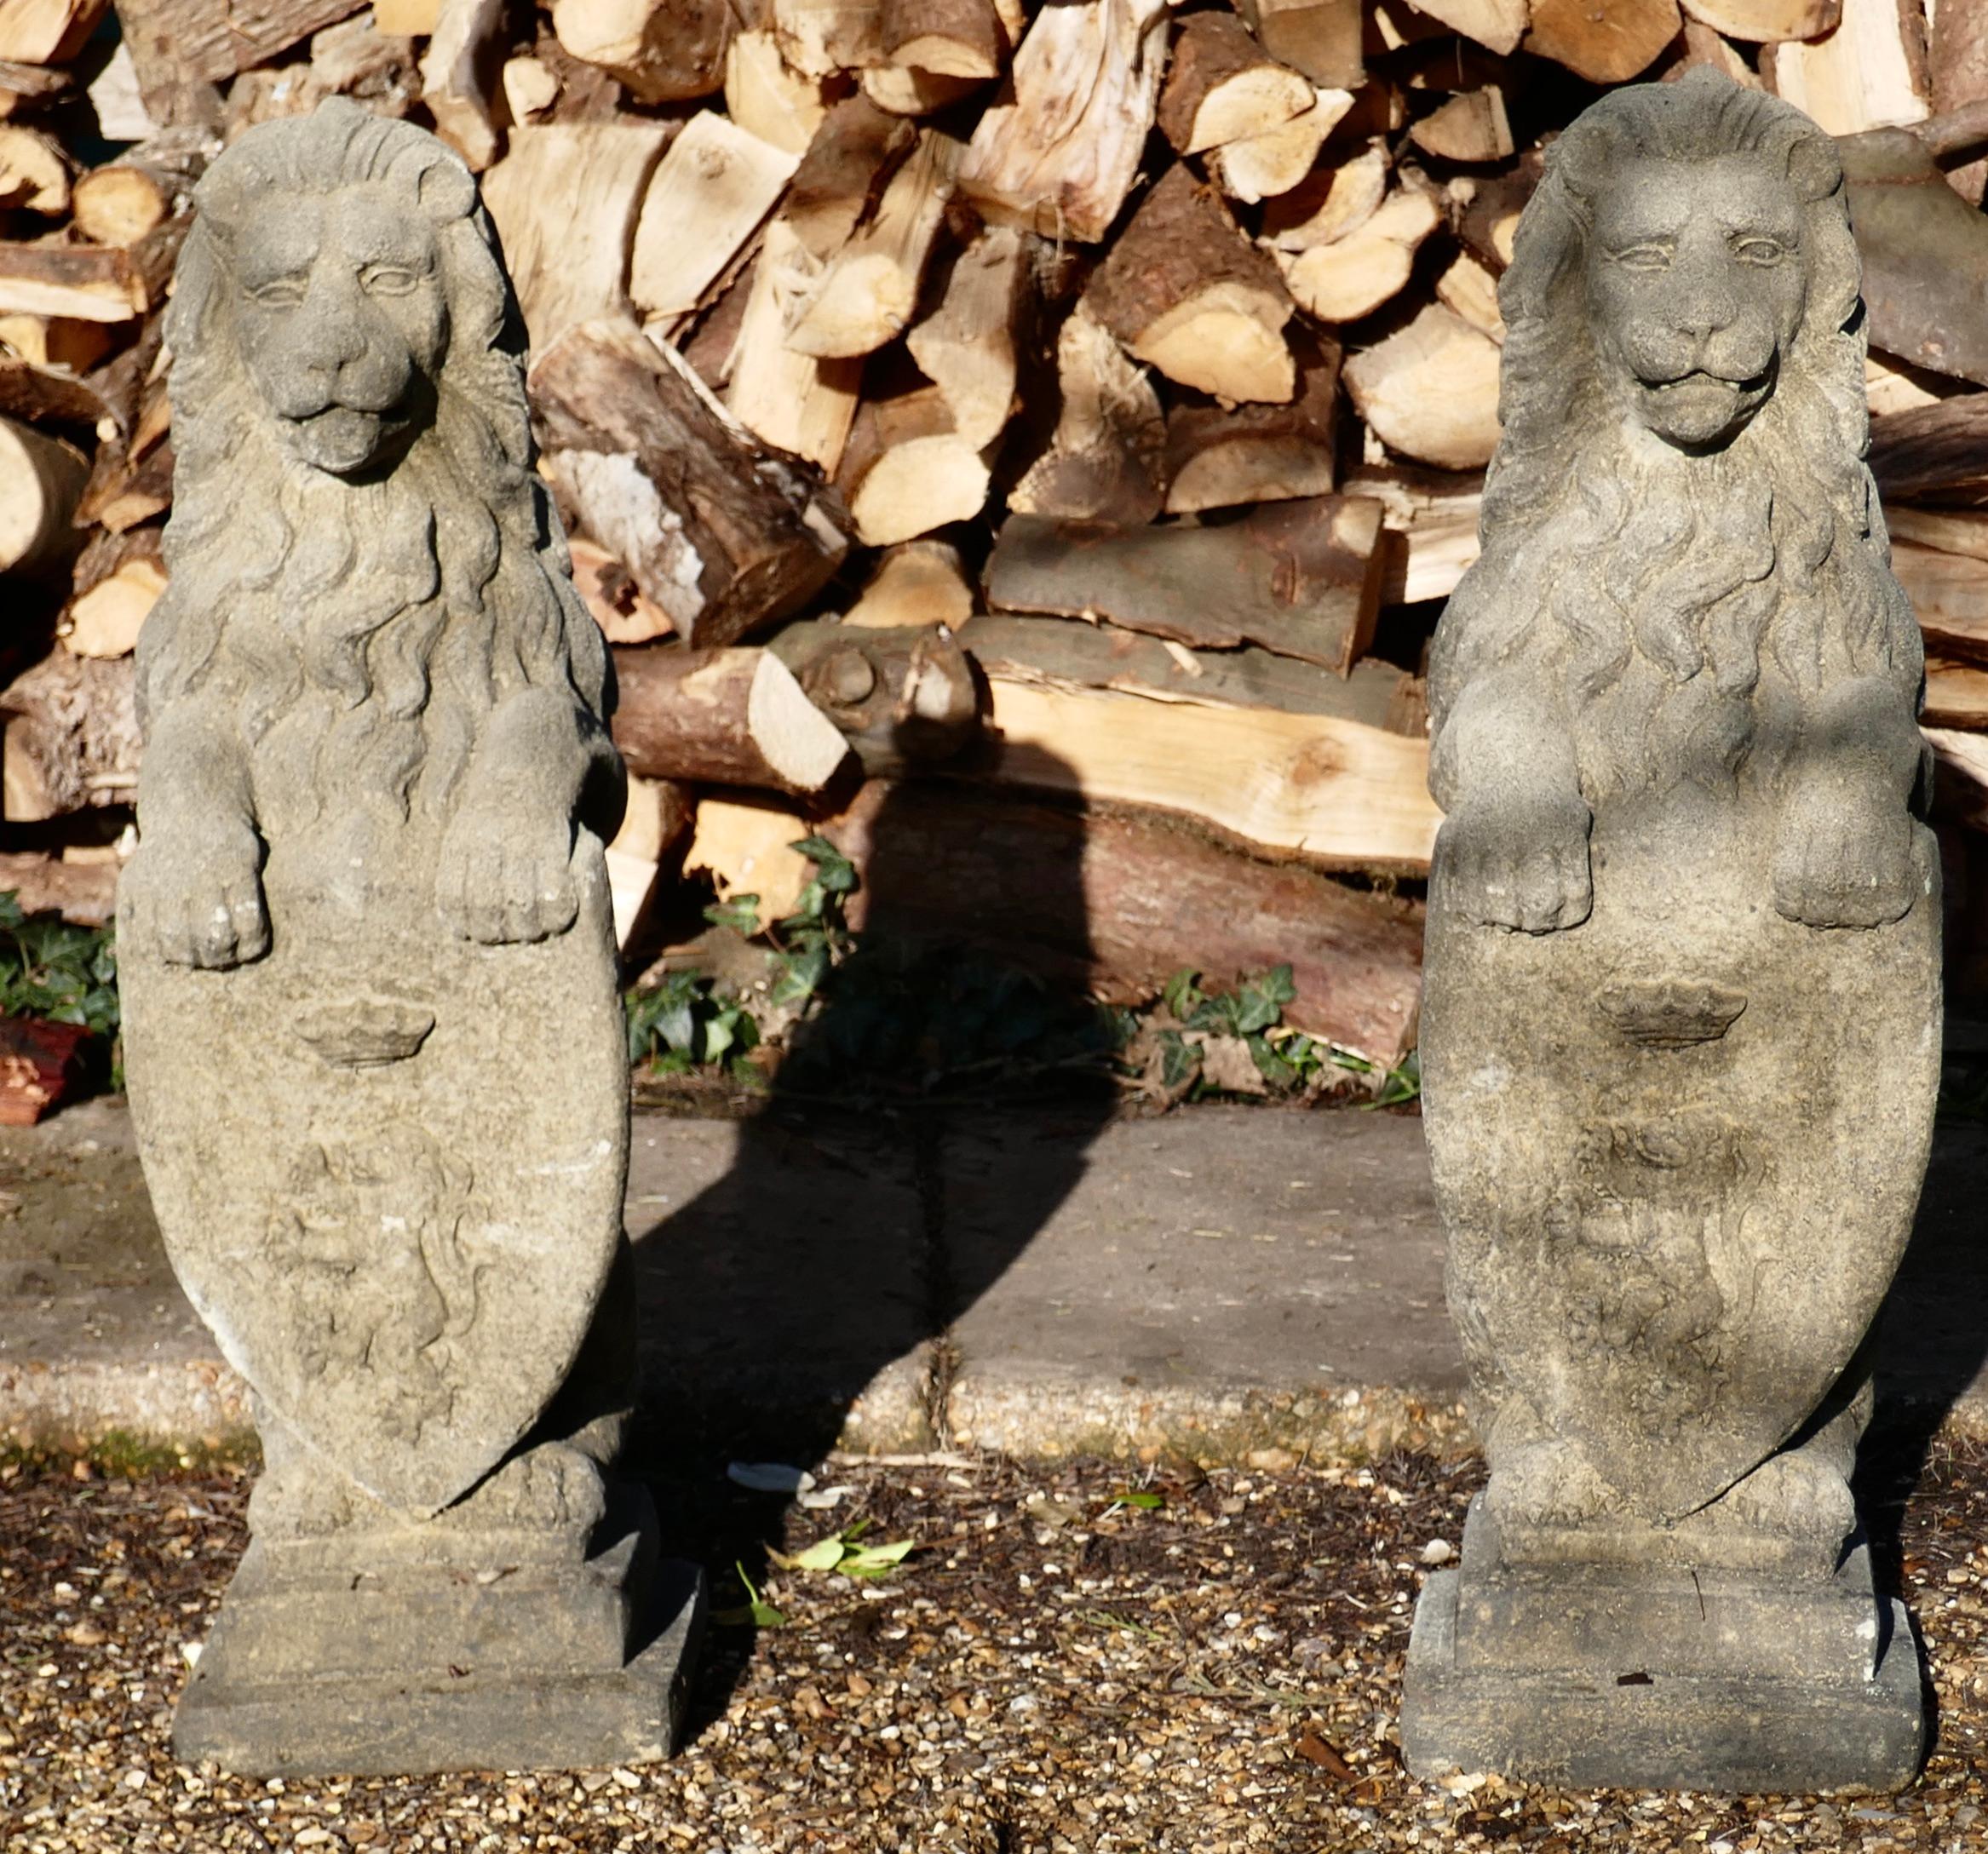 Pair of Large Sculptures of English Stone Heraldic Lions

These are weathered Statues of Male Lions they sit proud with raised paws resting on a heraldic shield which has a coronet over a Lion Rampant 
The Lions are fully sculpted in the round